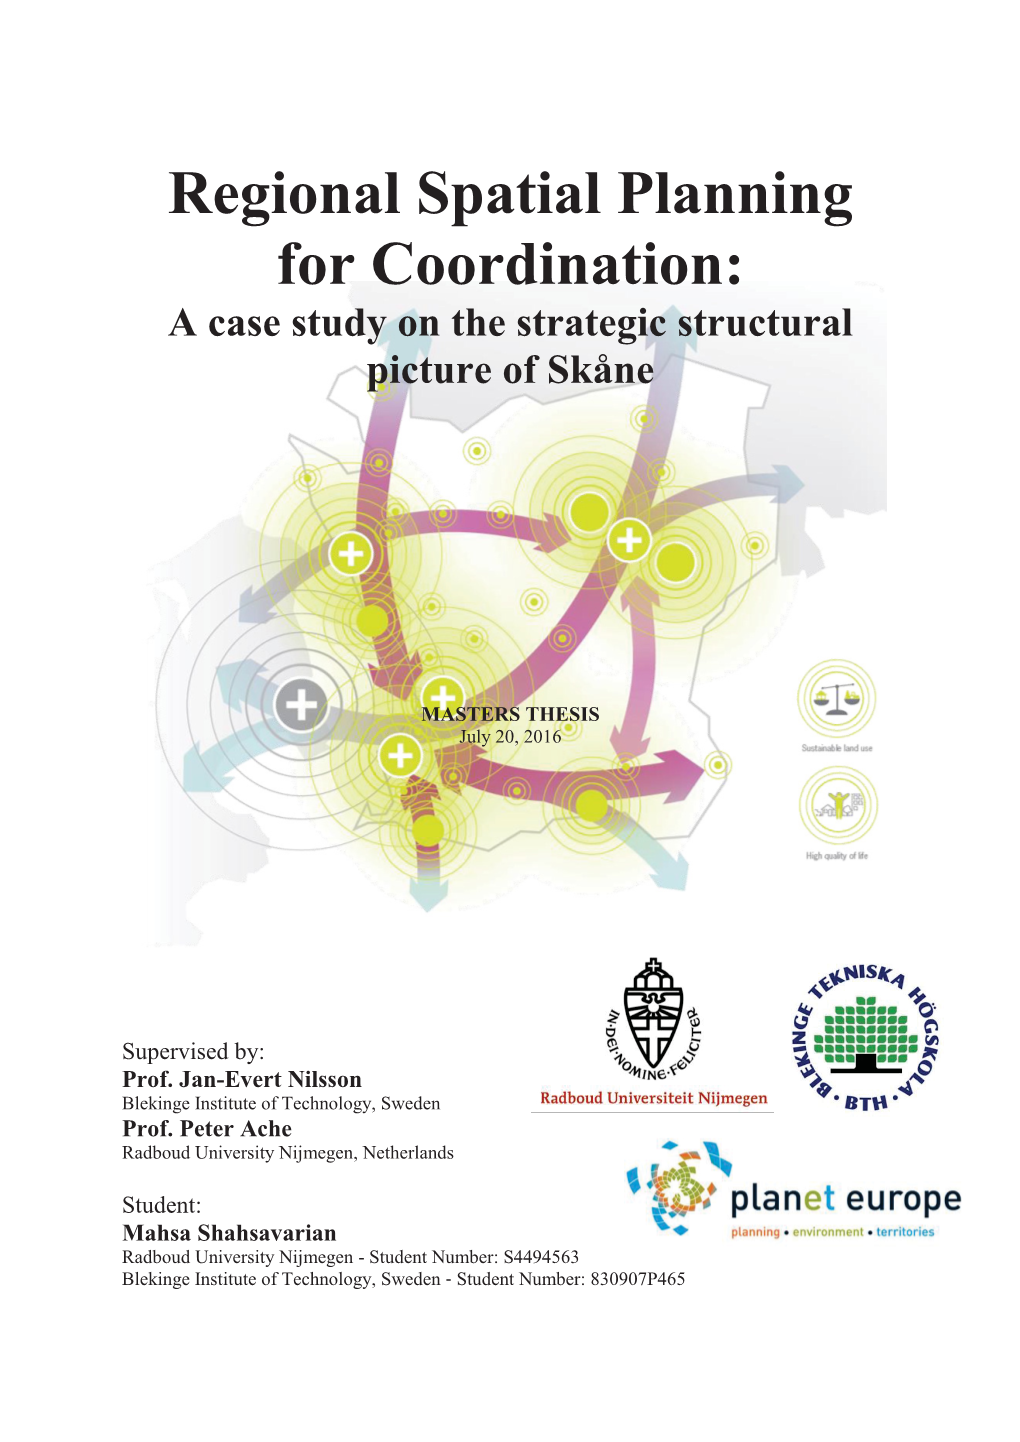 Regional Spatial Planning for Coordination: a Case Study on the Strategic Structural Picture of Skåne